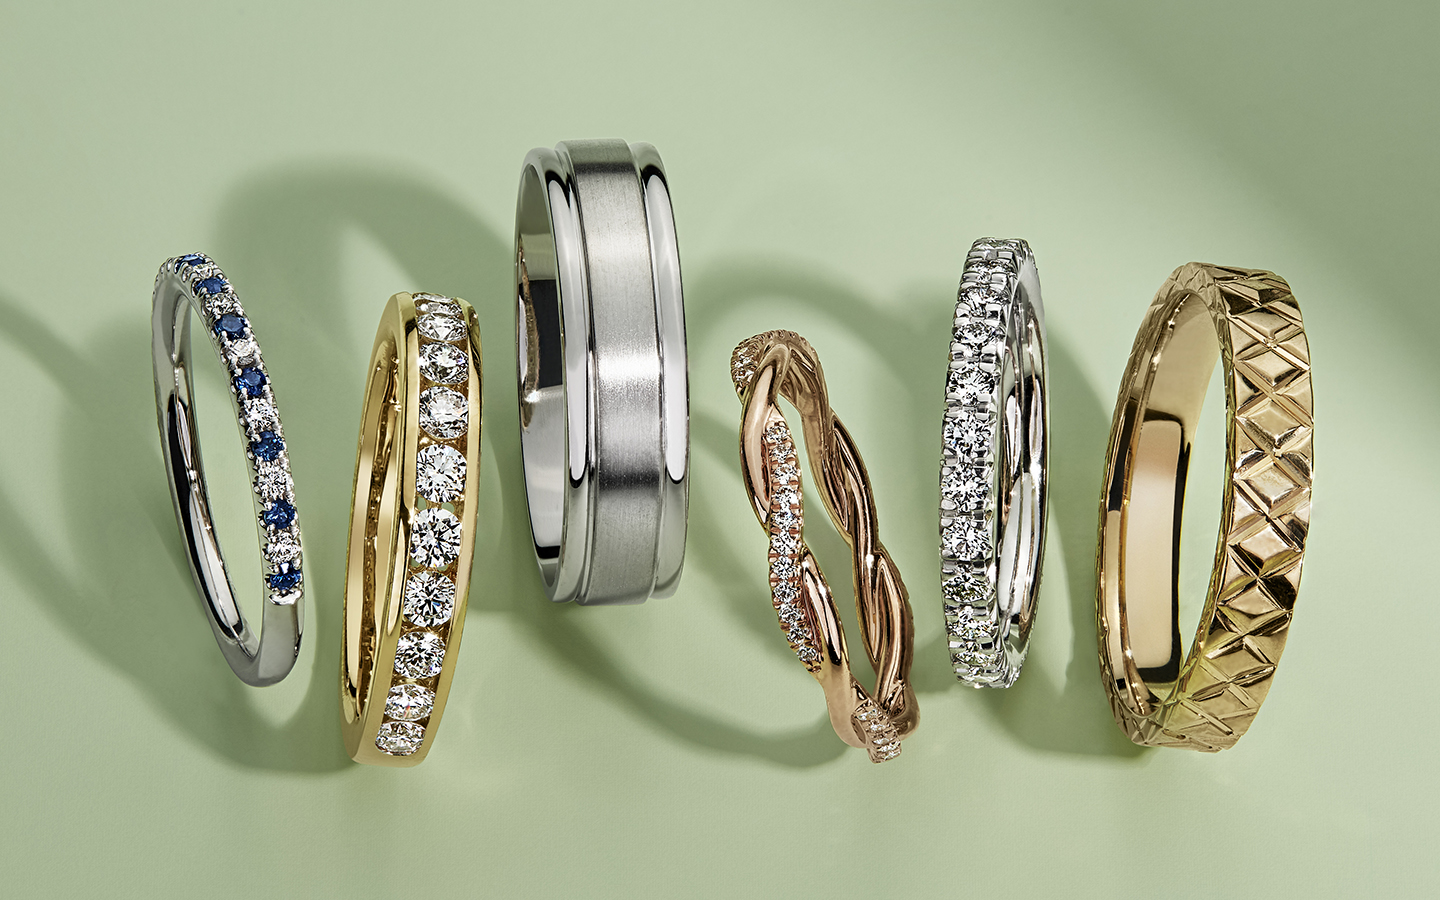 Six men's and women’s wedding bands including eternity, diamond, gold and gemstone rings.